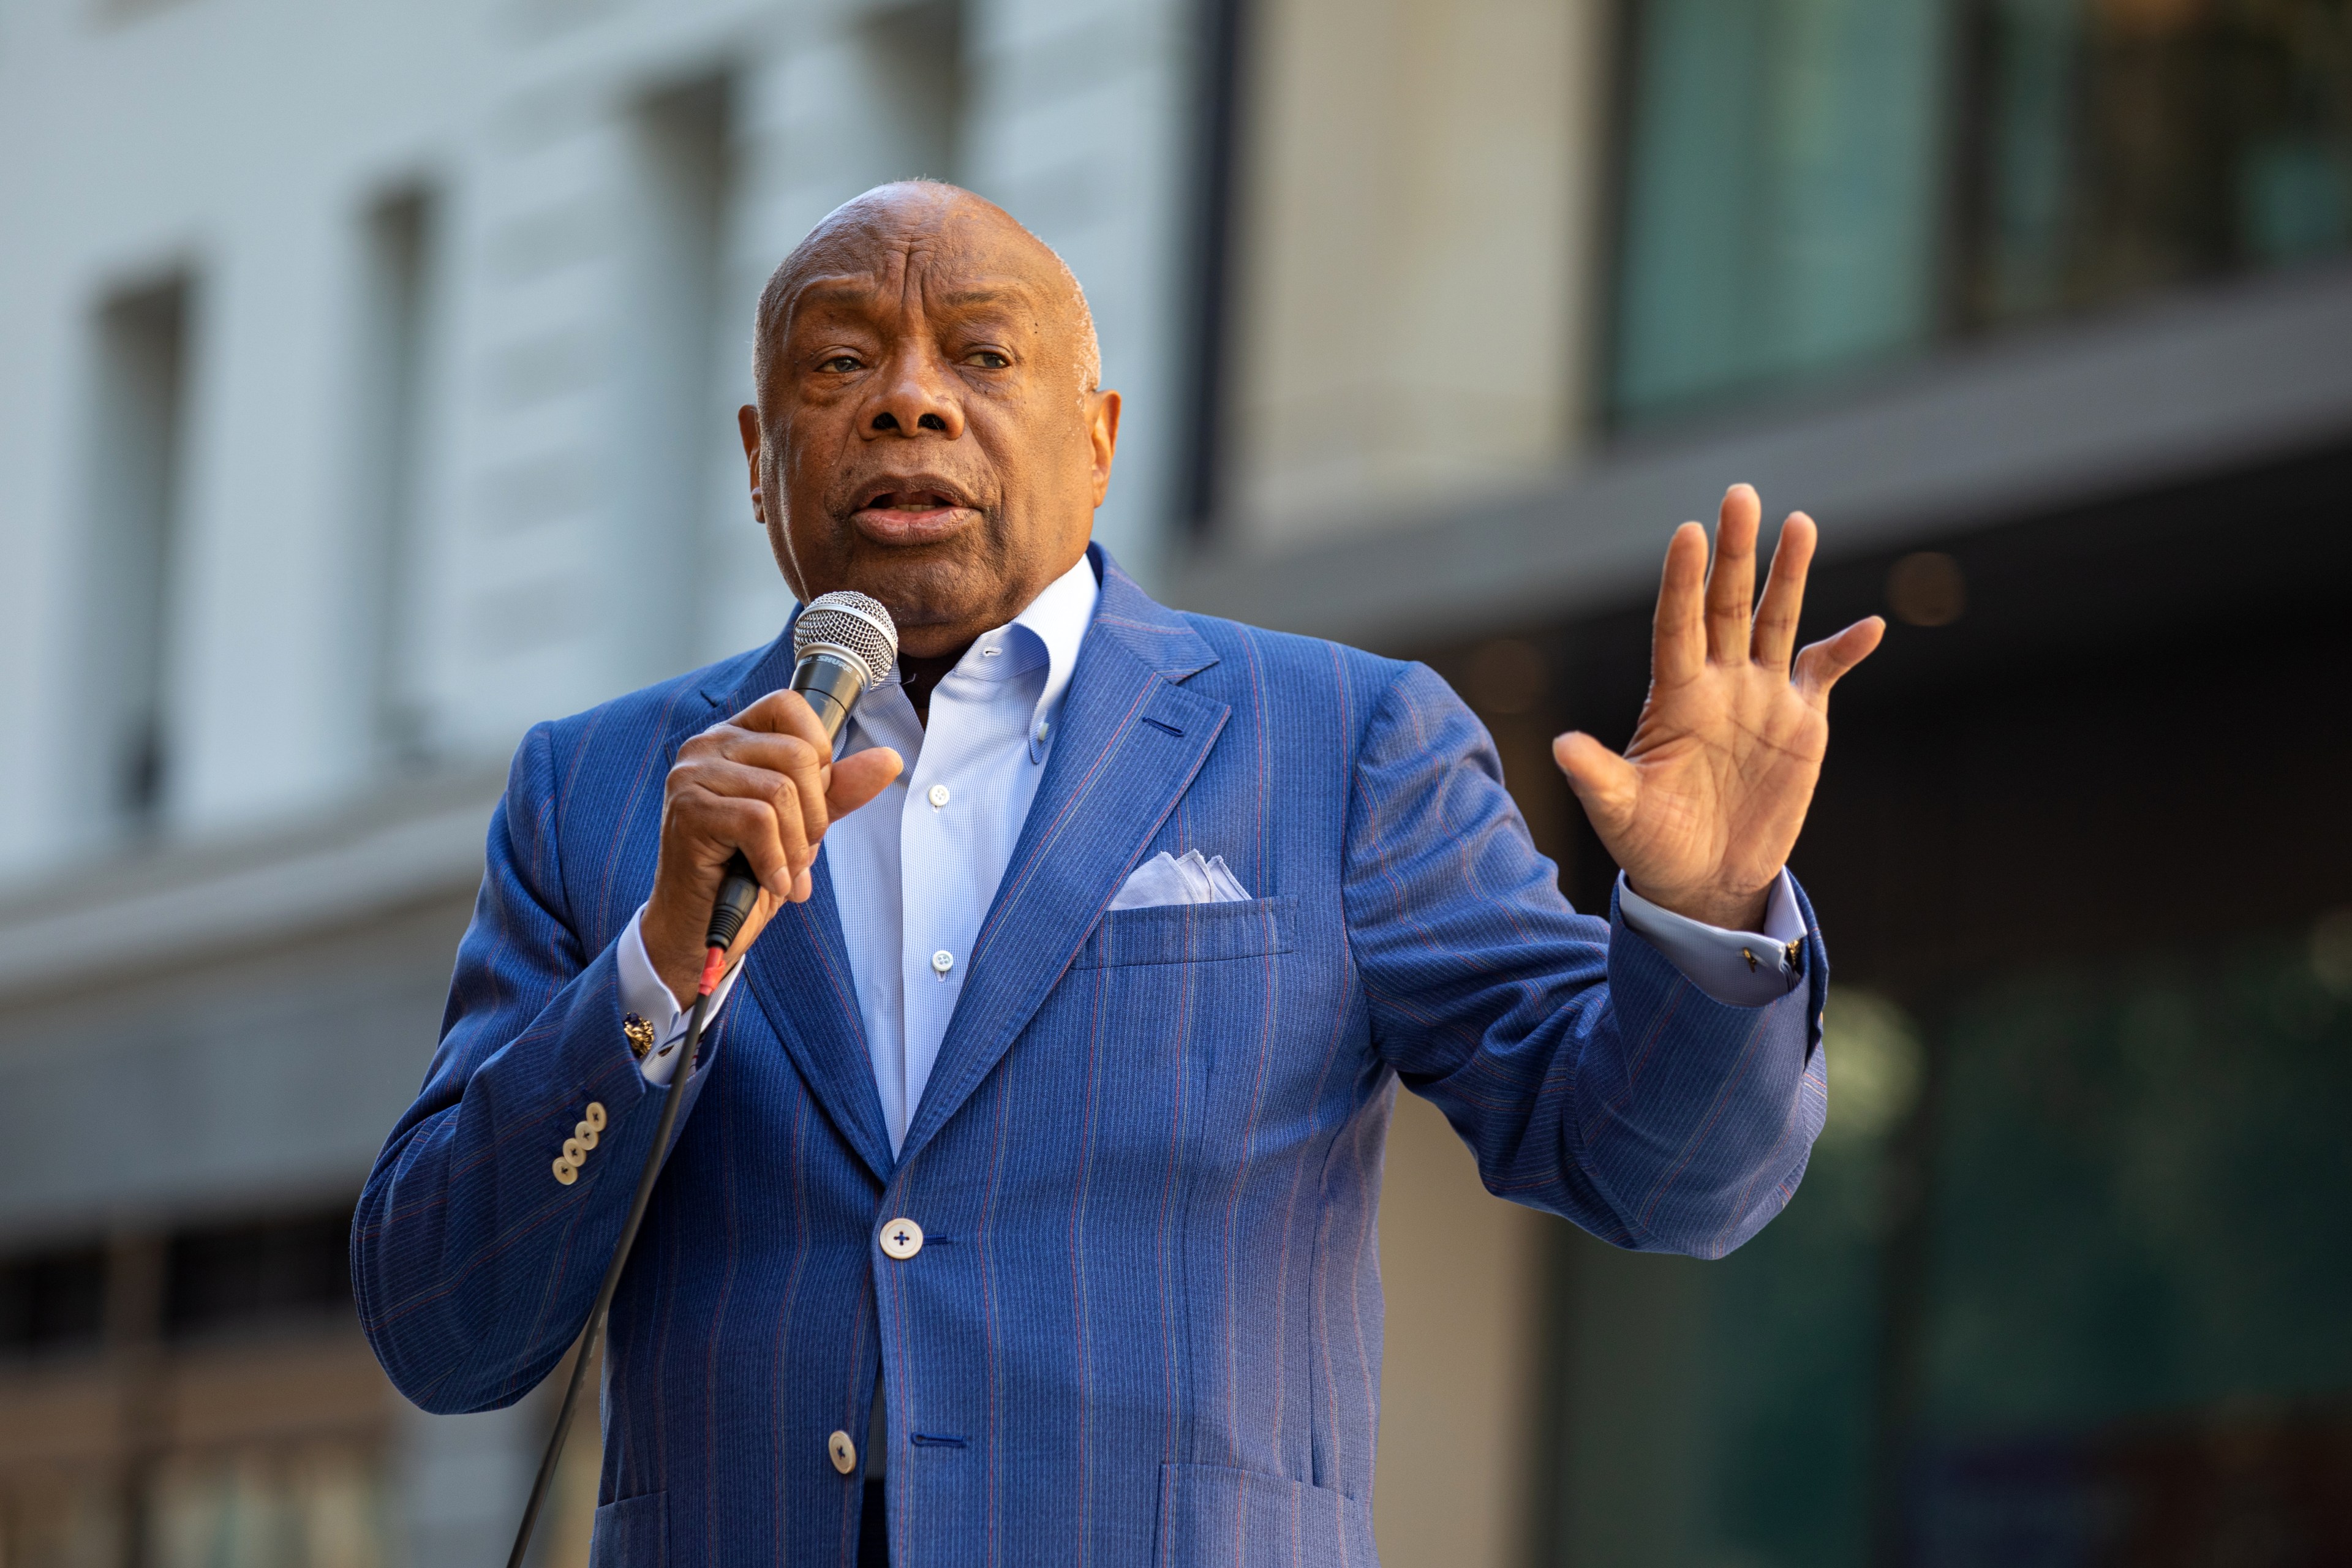 Willie Brown in a suit stands outside with a microphone.